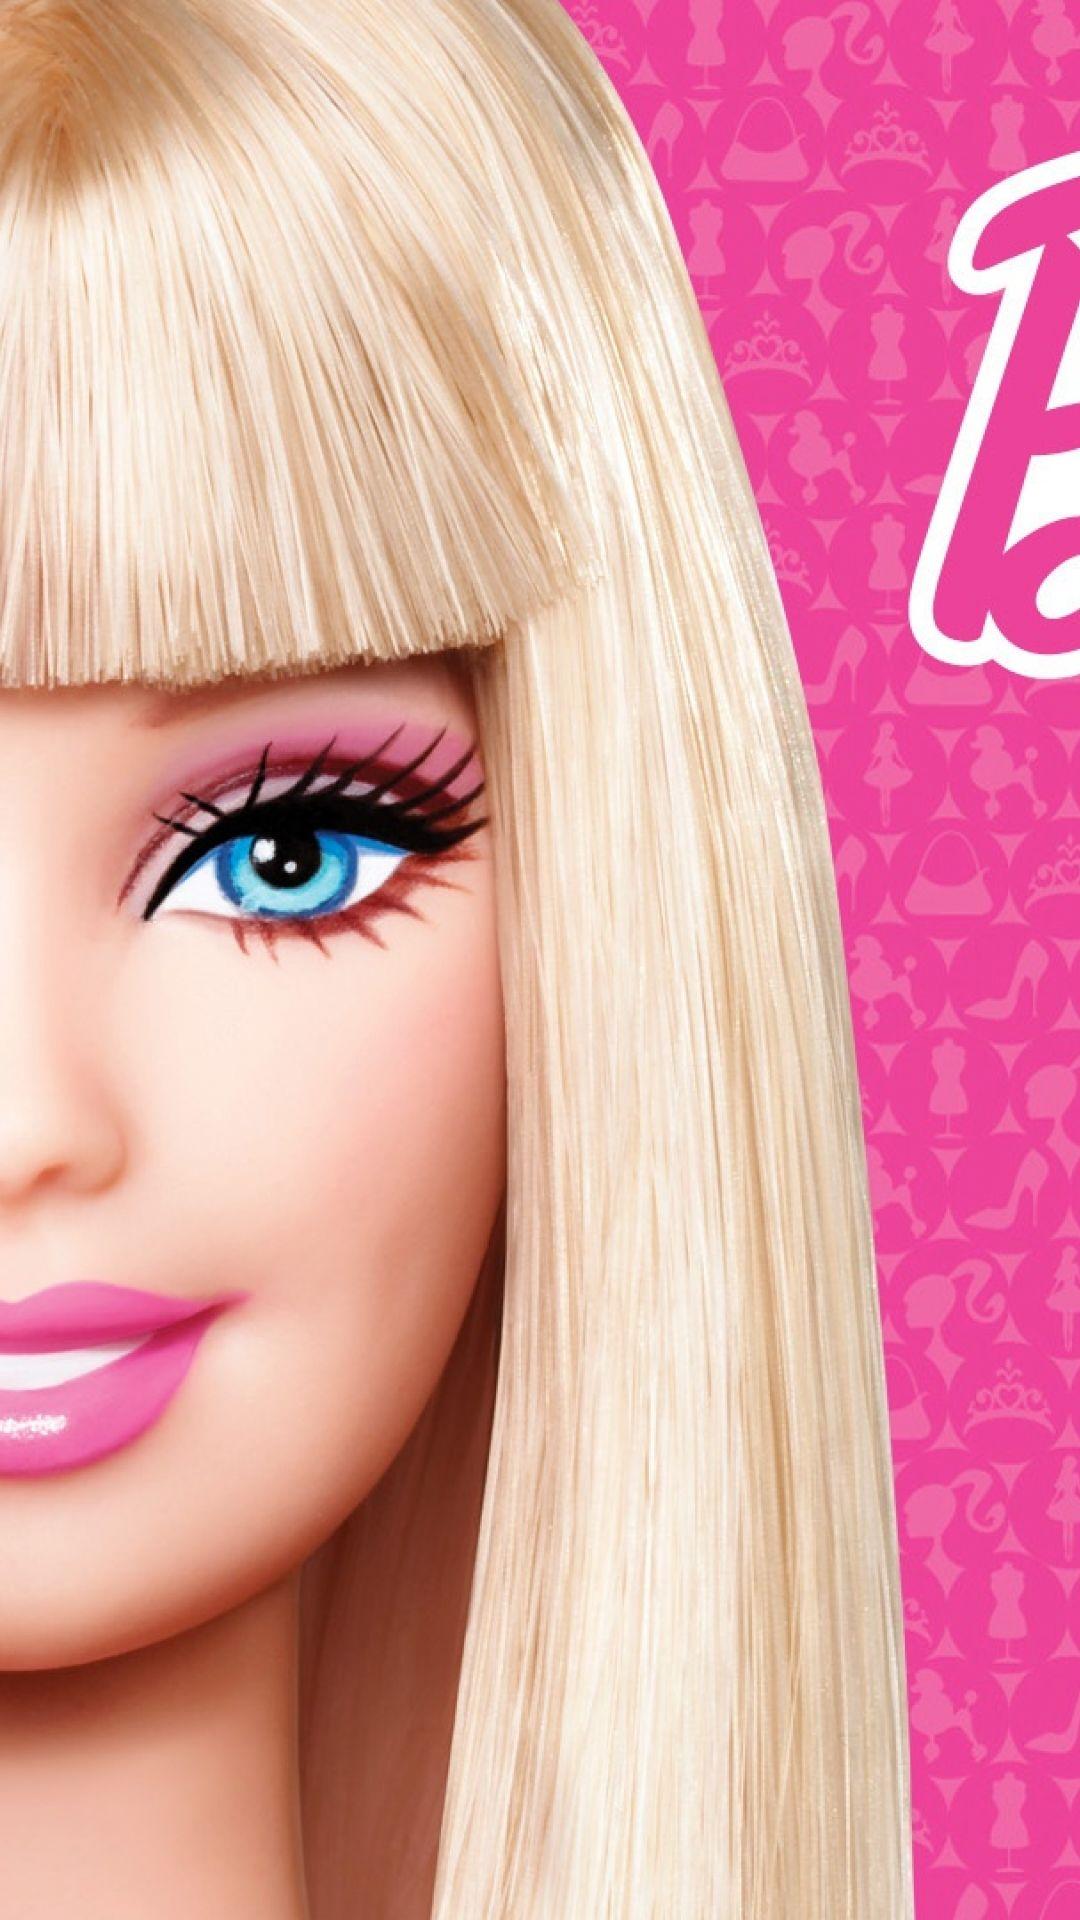 Premium AI Image  Barbie doll wallpapers for iphone and android download  the app for iphone and android